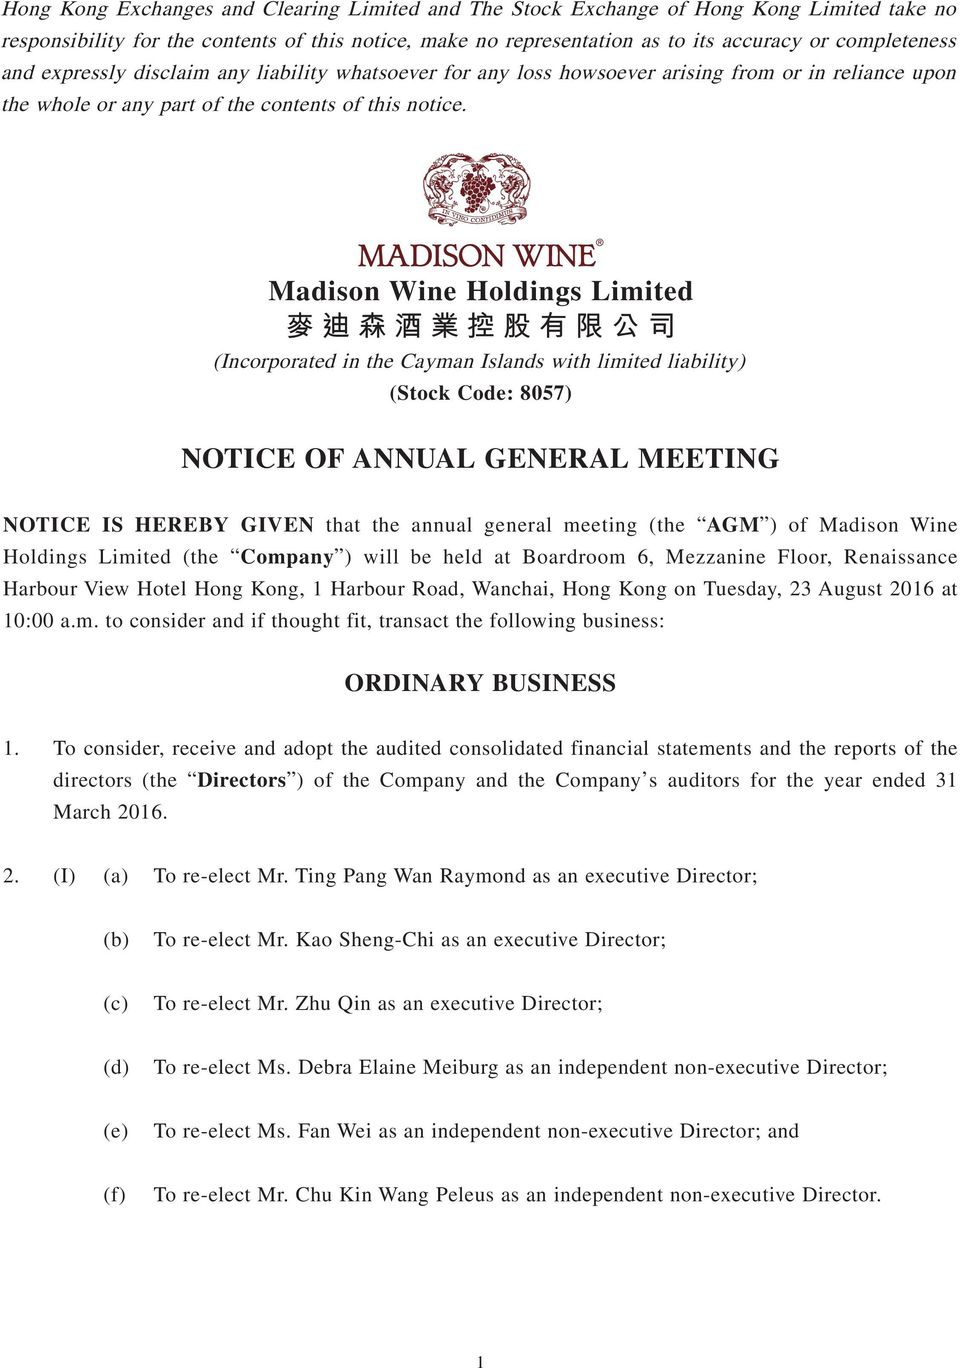 Madison Wine Holdings Limited (Incorporated in the Cayman Islands with limited liability) (Stock Code: 8057) NOTICE OF ANNUAL GENERAL MEETING NOTICE IS HEREBY GIVEN that the annual general meeting